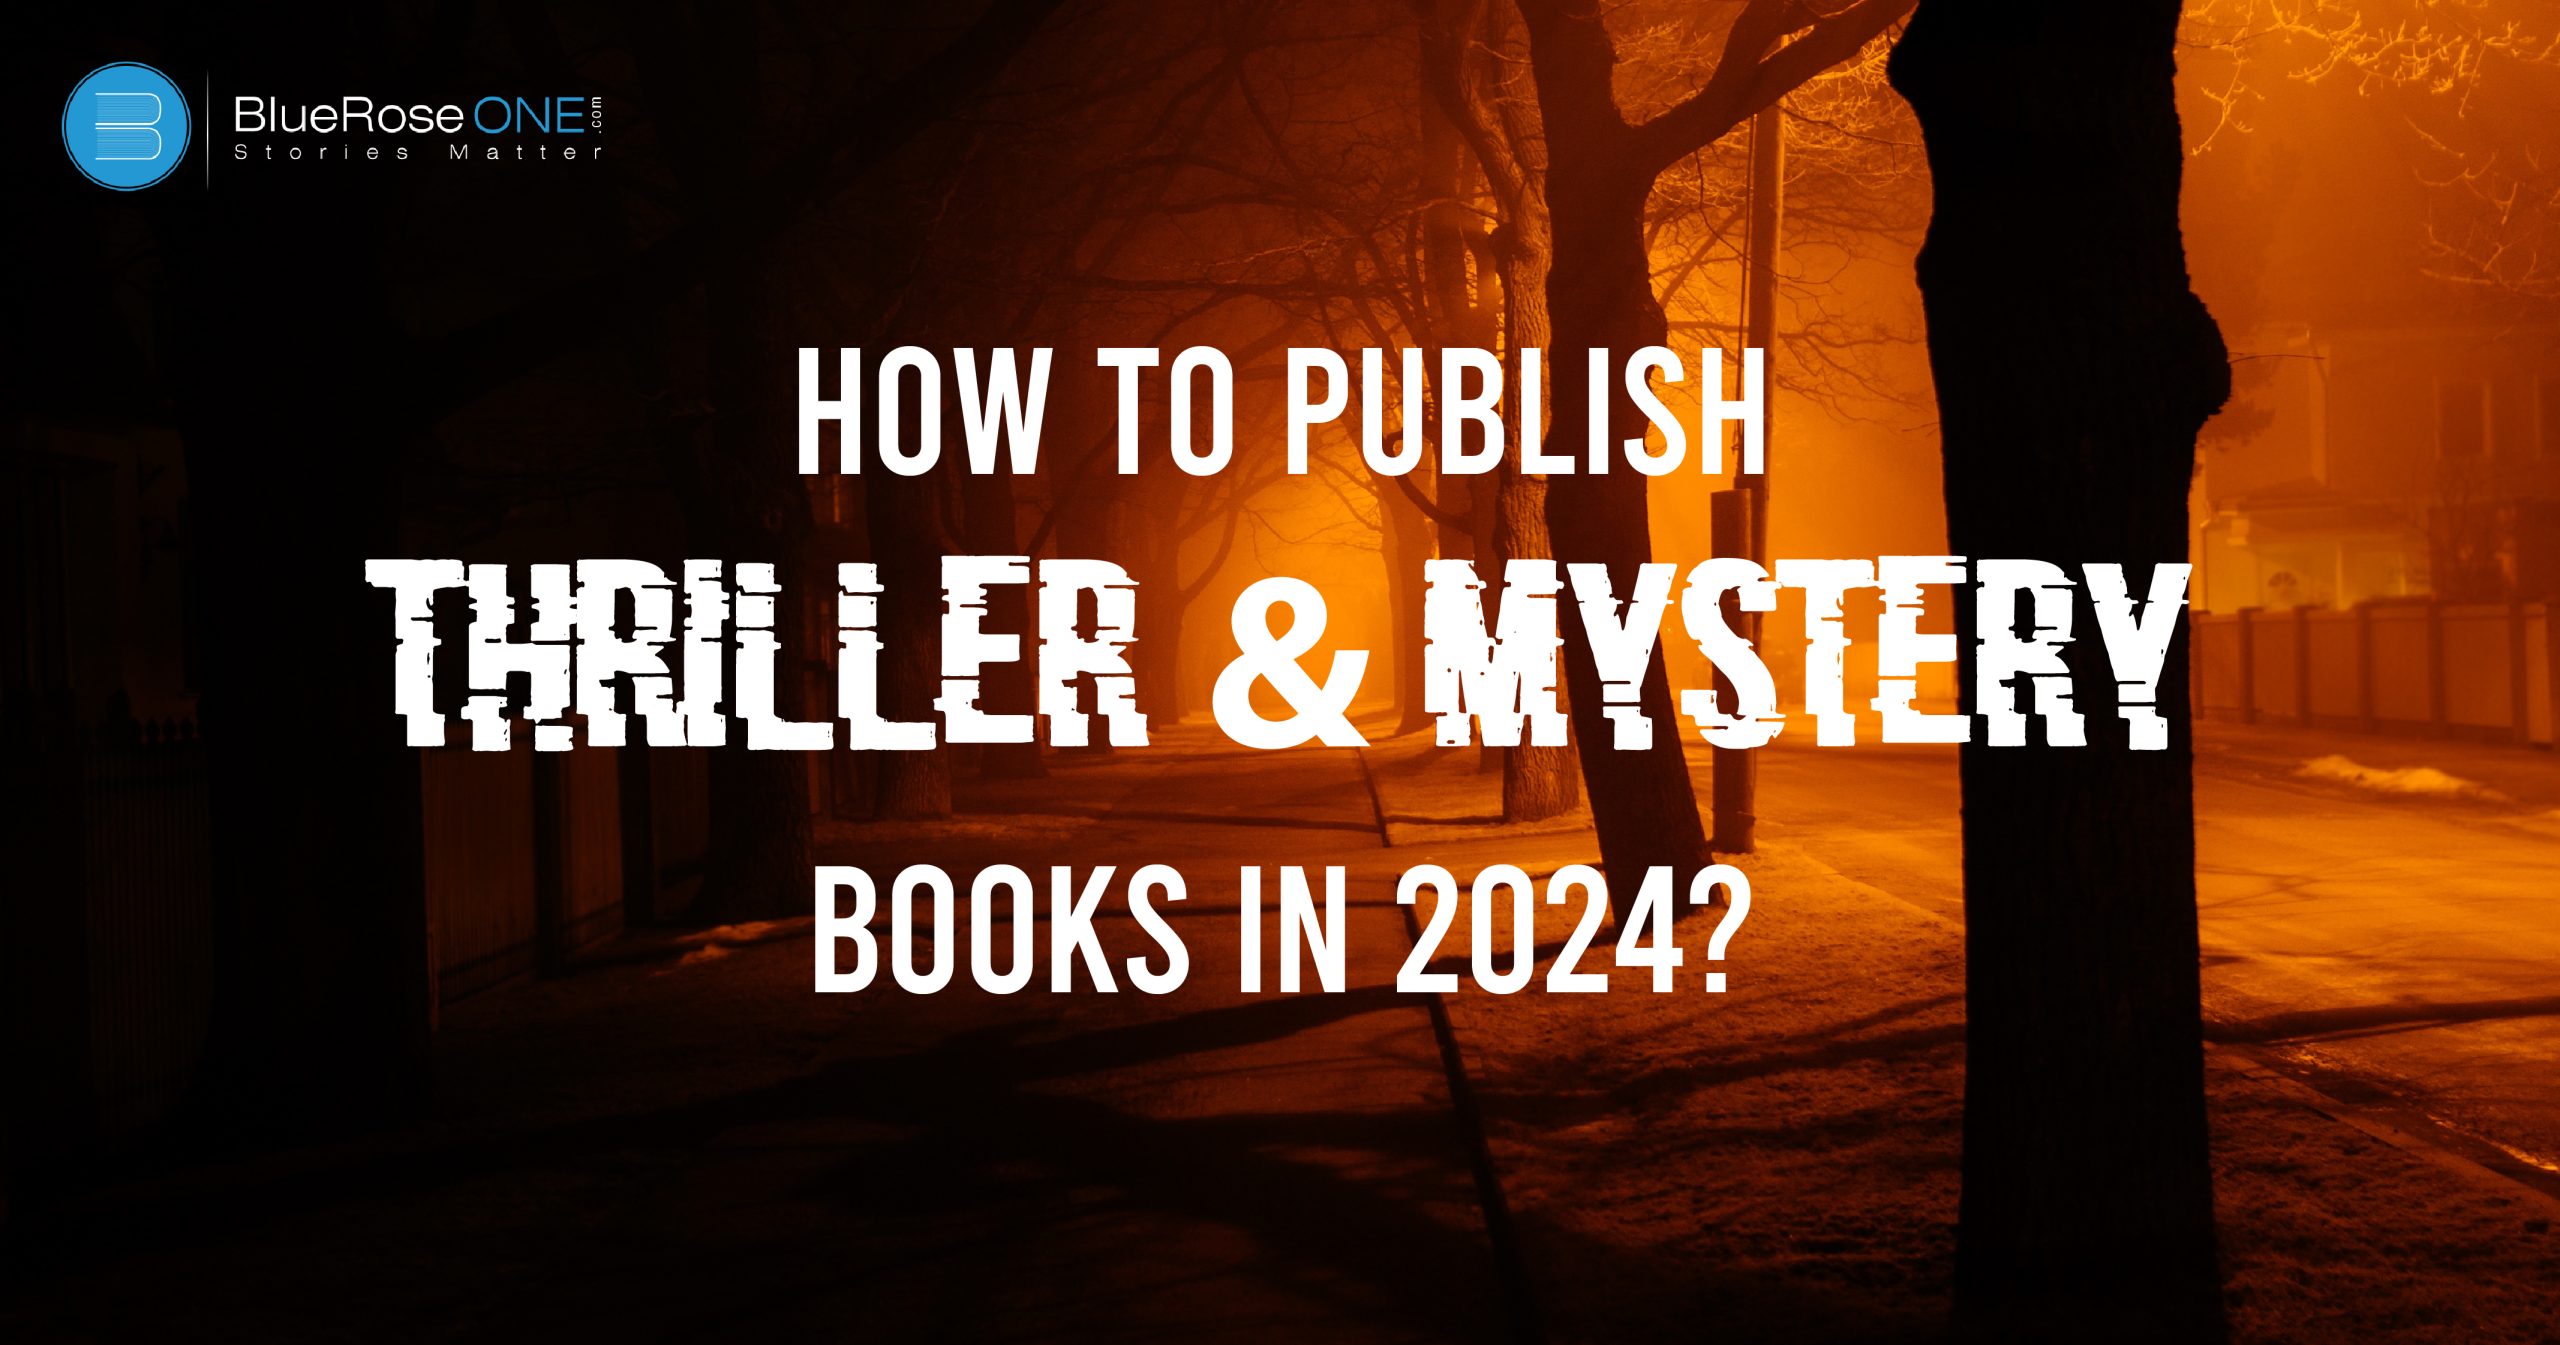 How to publish thriller and mystery books in 2024?